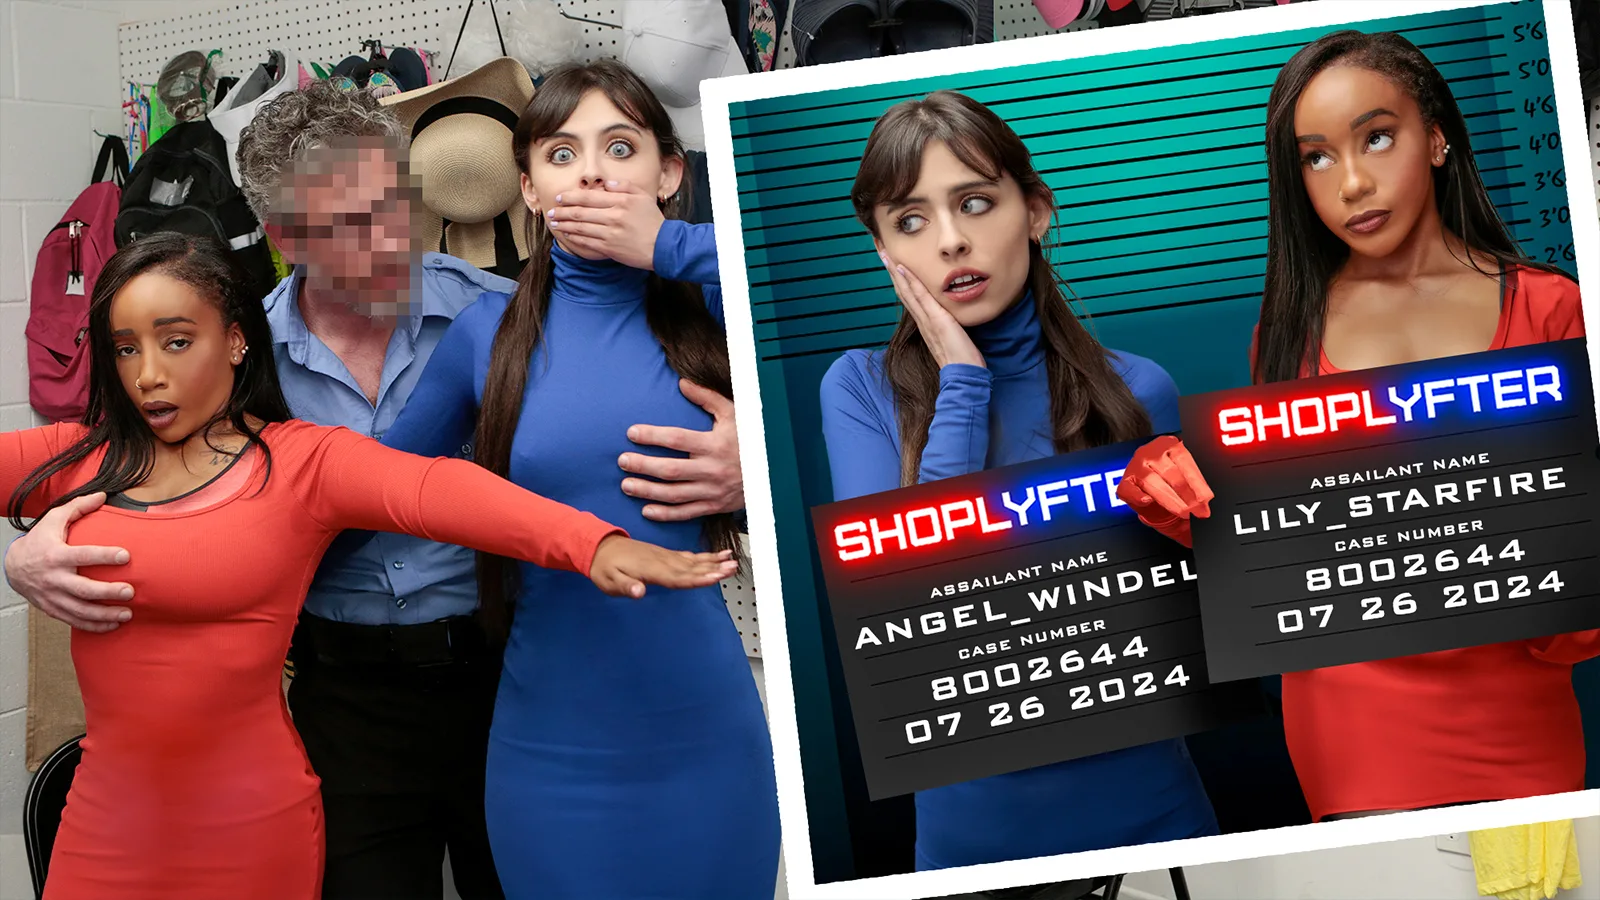 Case No. 8002644 - Costume Thieves - Shoplyfter